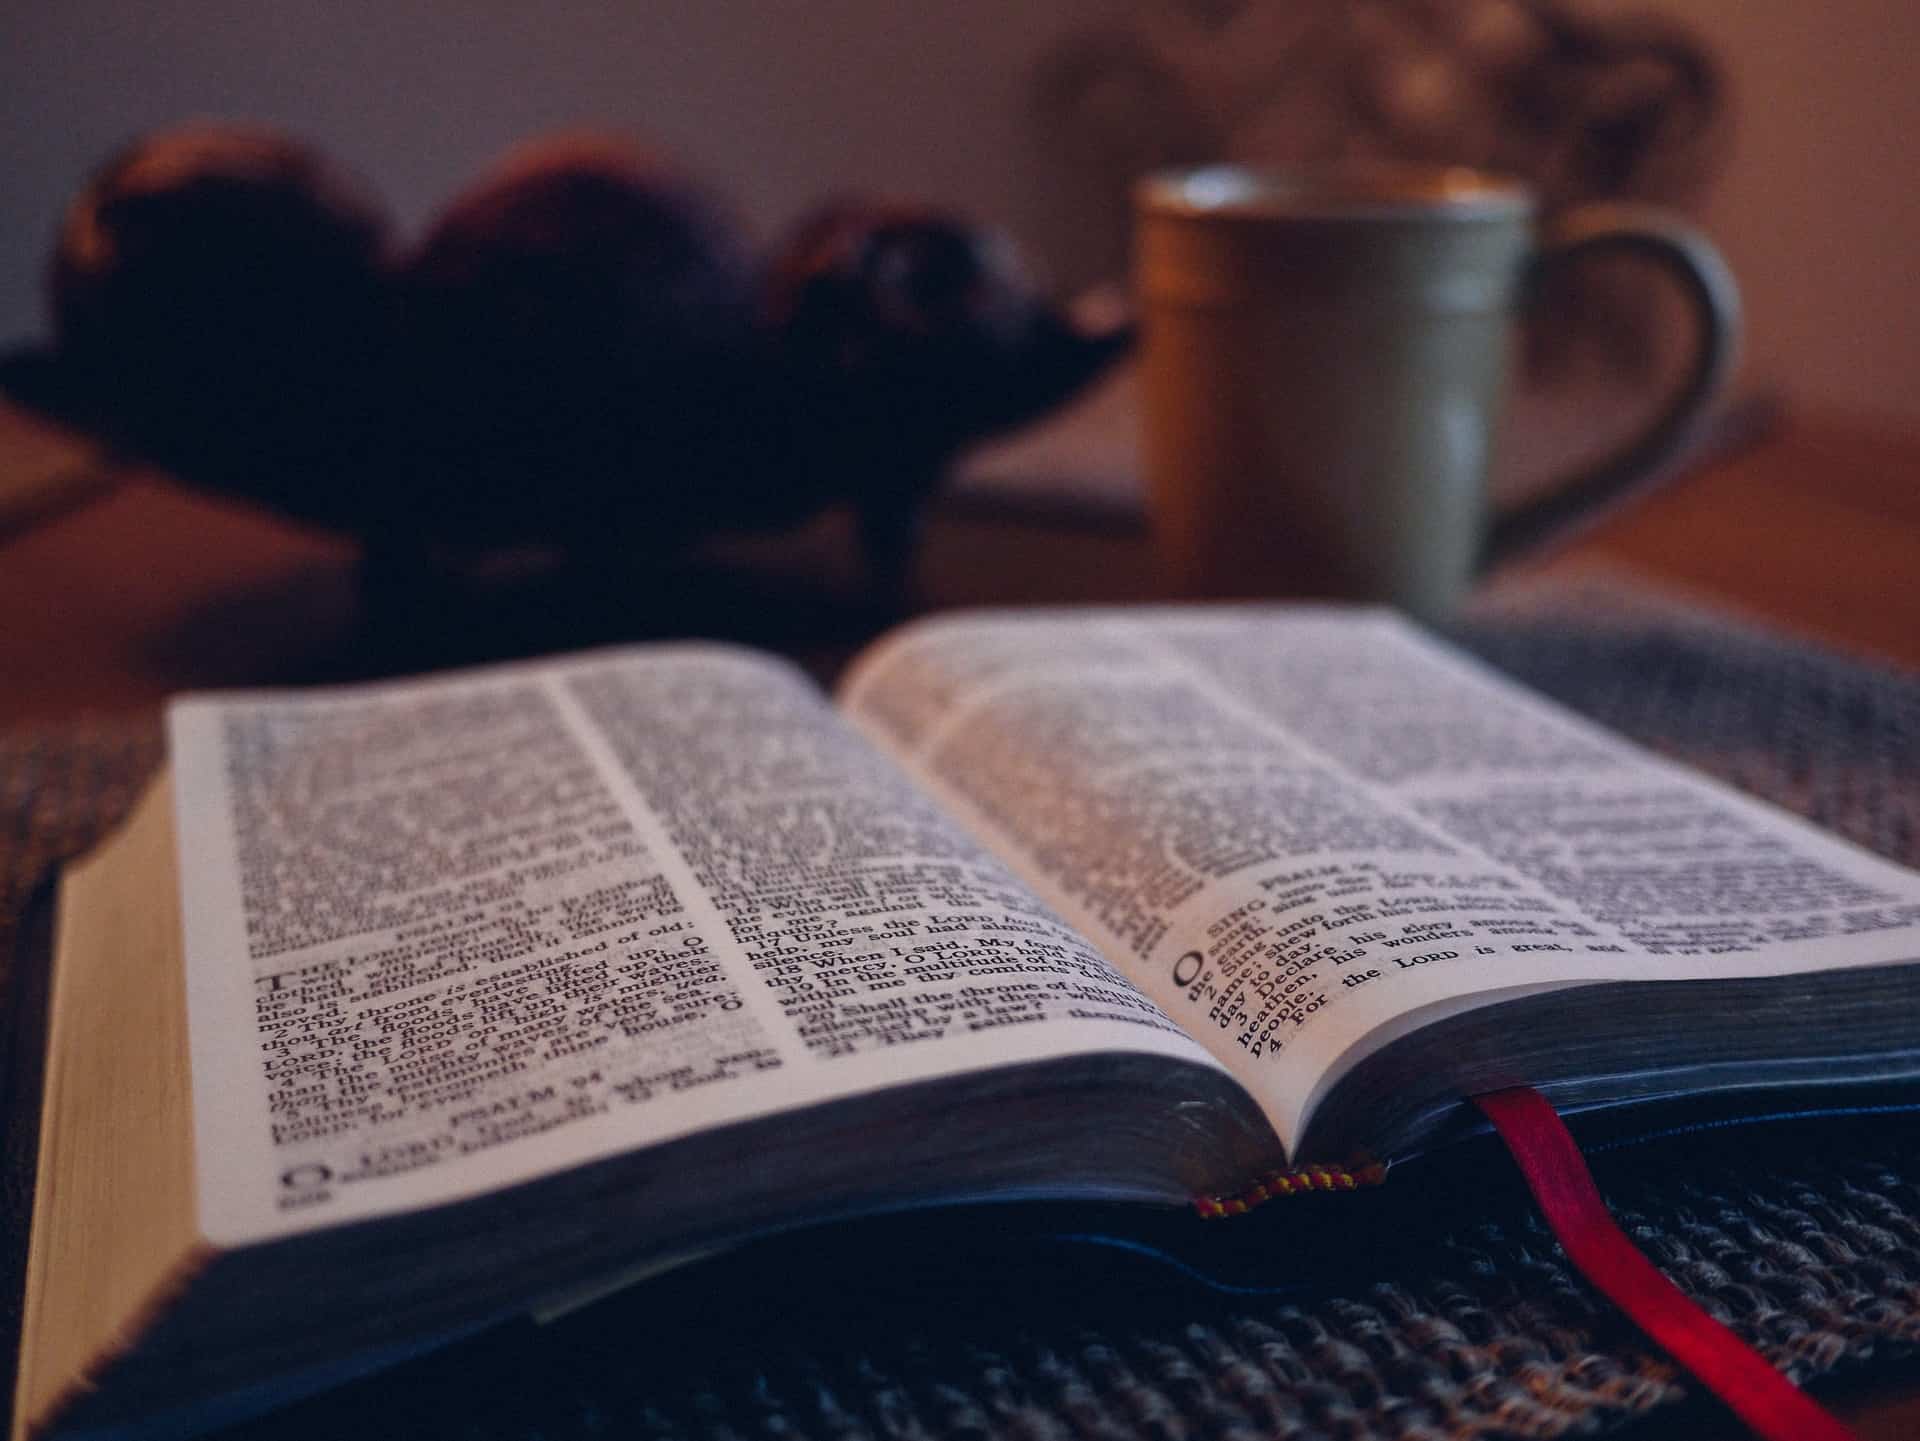 READING THE BIBLE AND SPENDING TIME WITH GOD